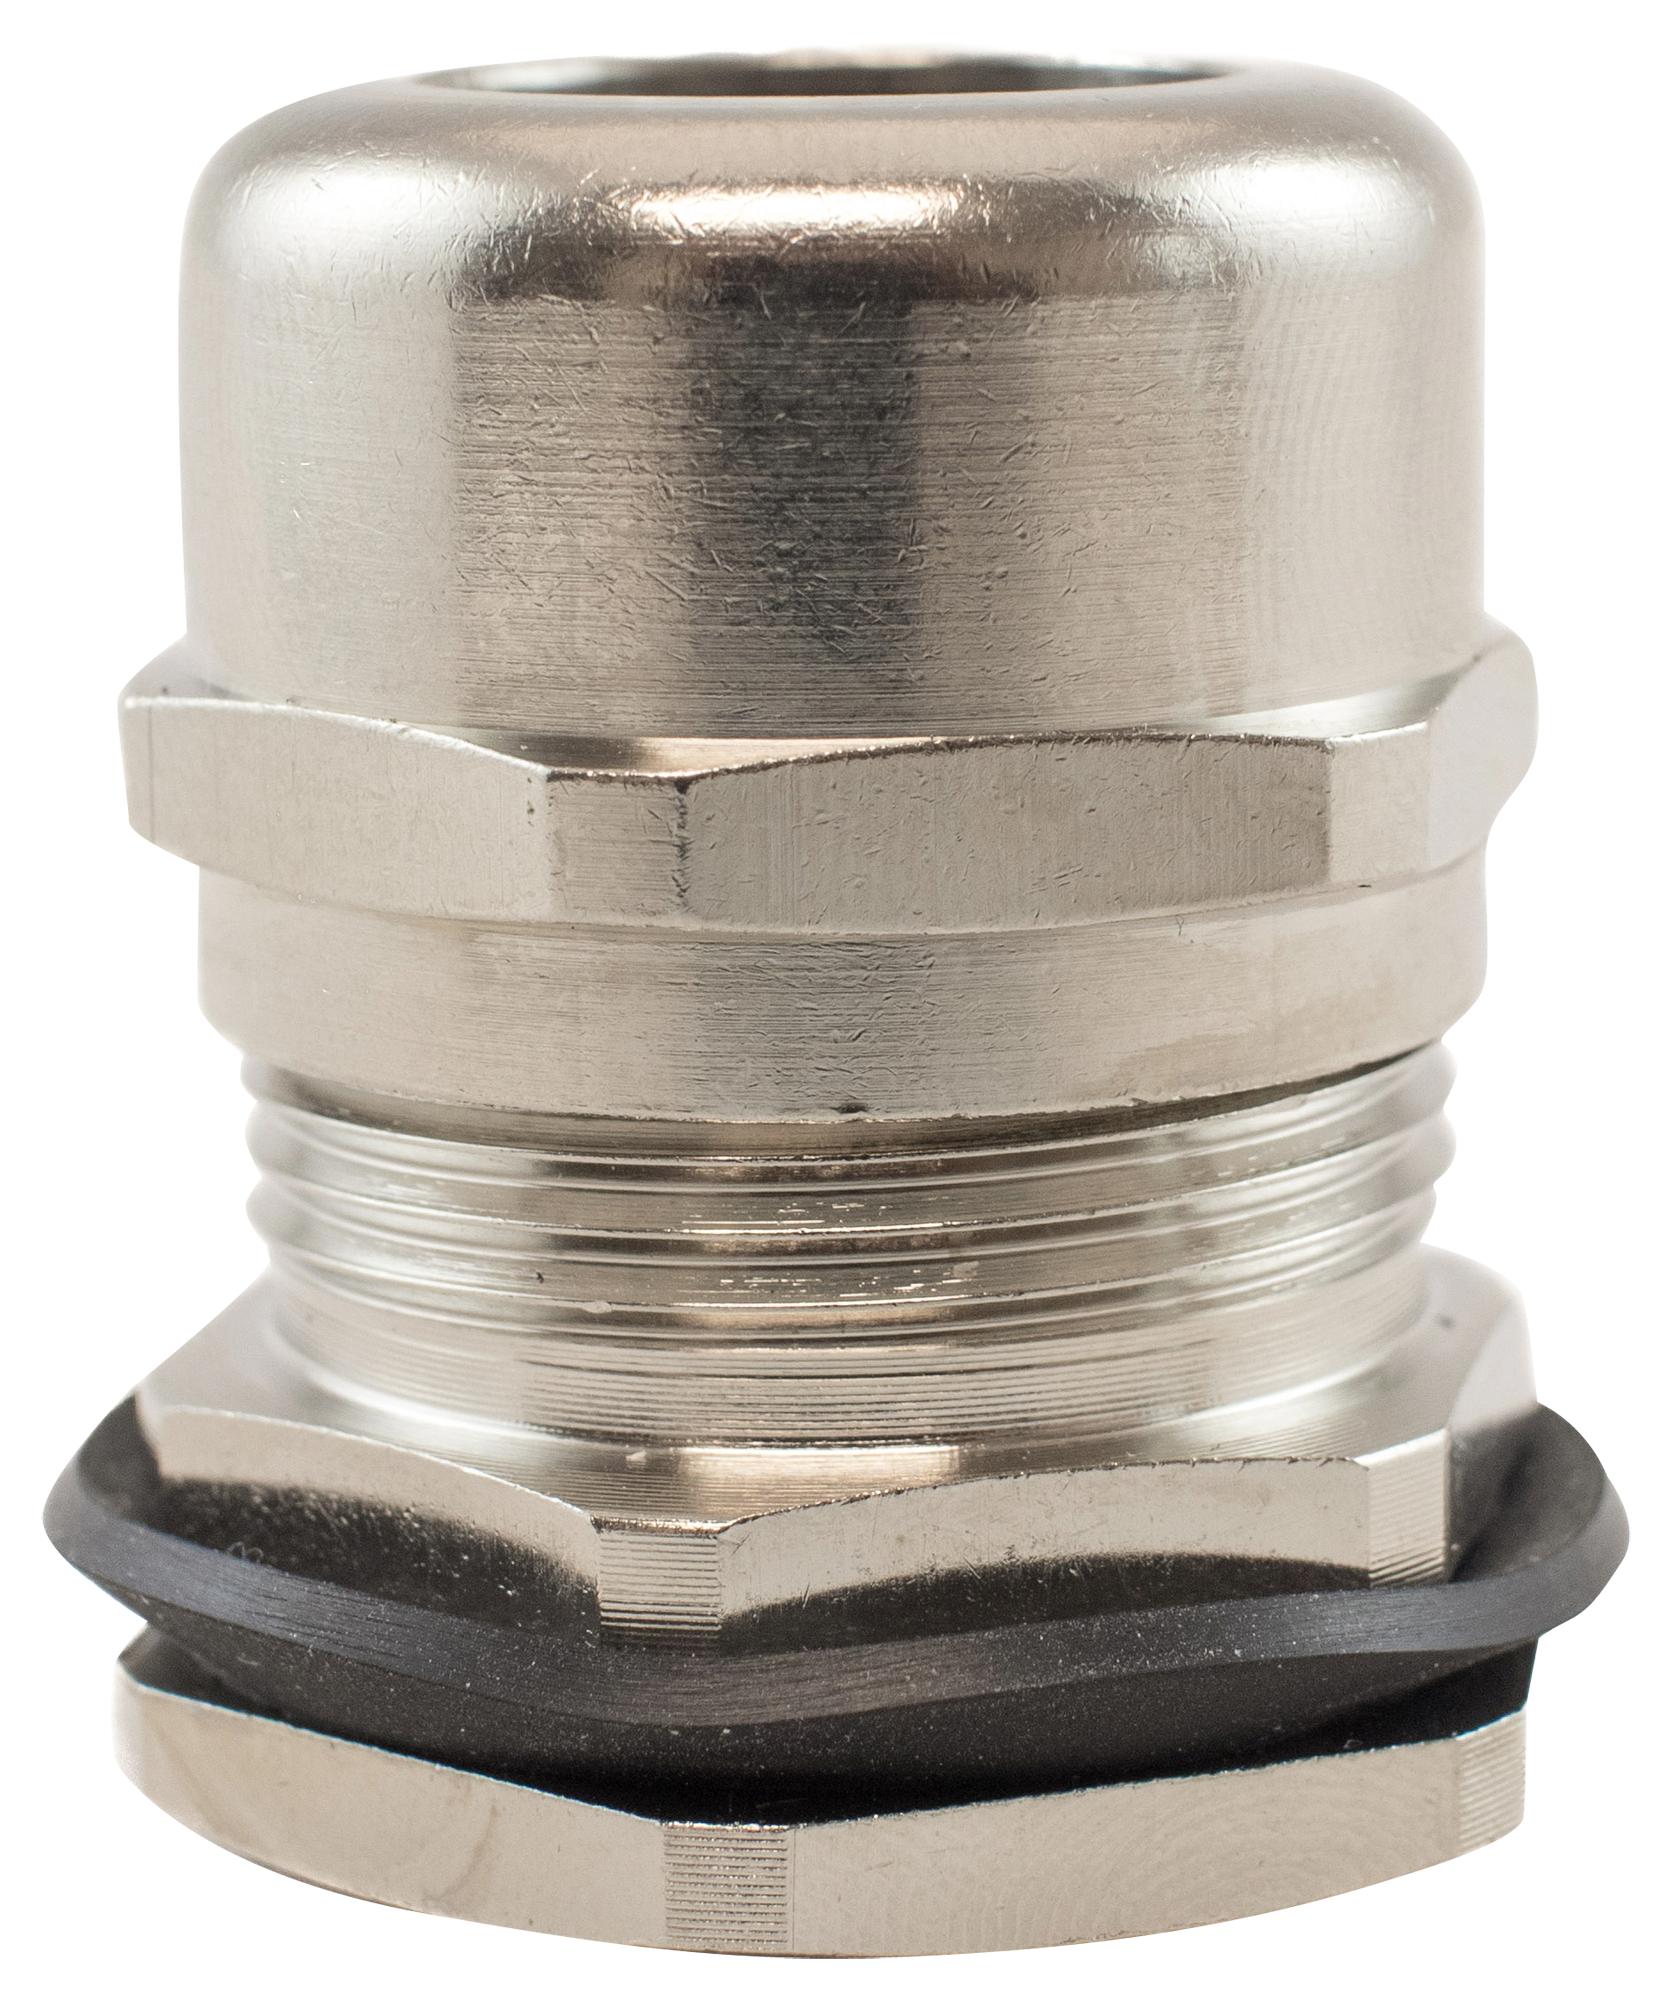 MES16 NC080 CABLE GLAND, M16X1.5, BRASS, 5-10MM ALPHA WIRE